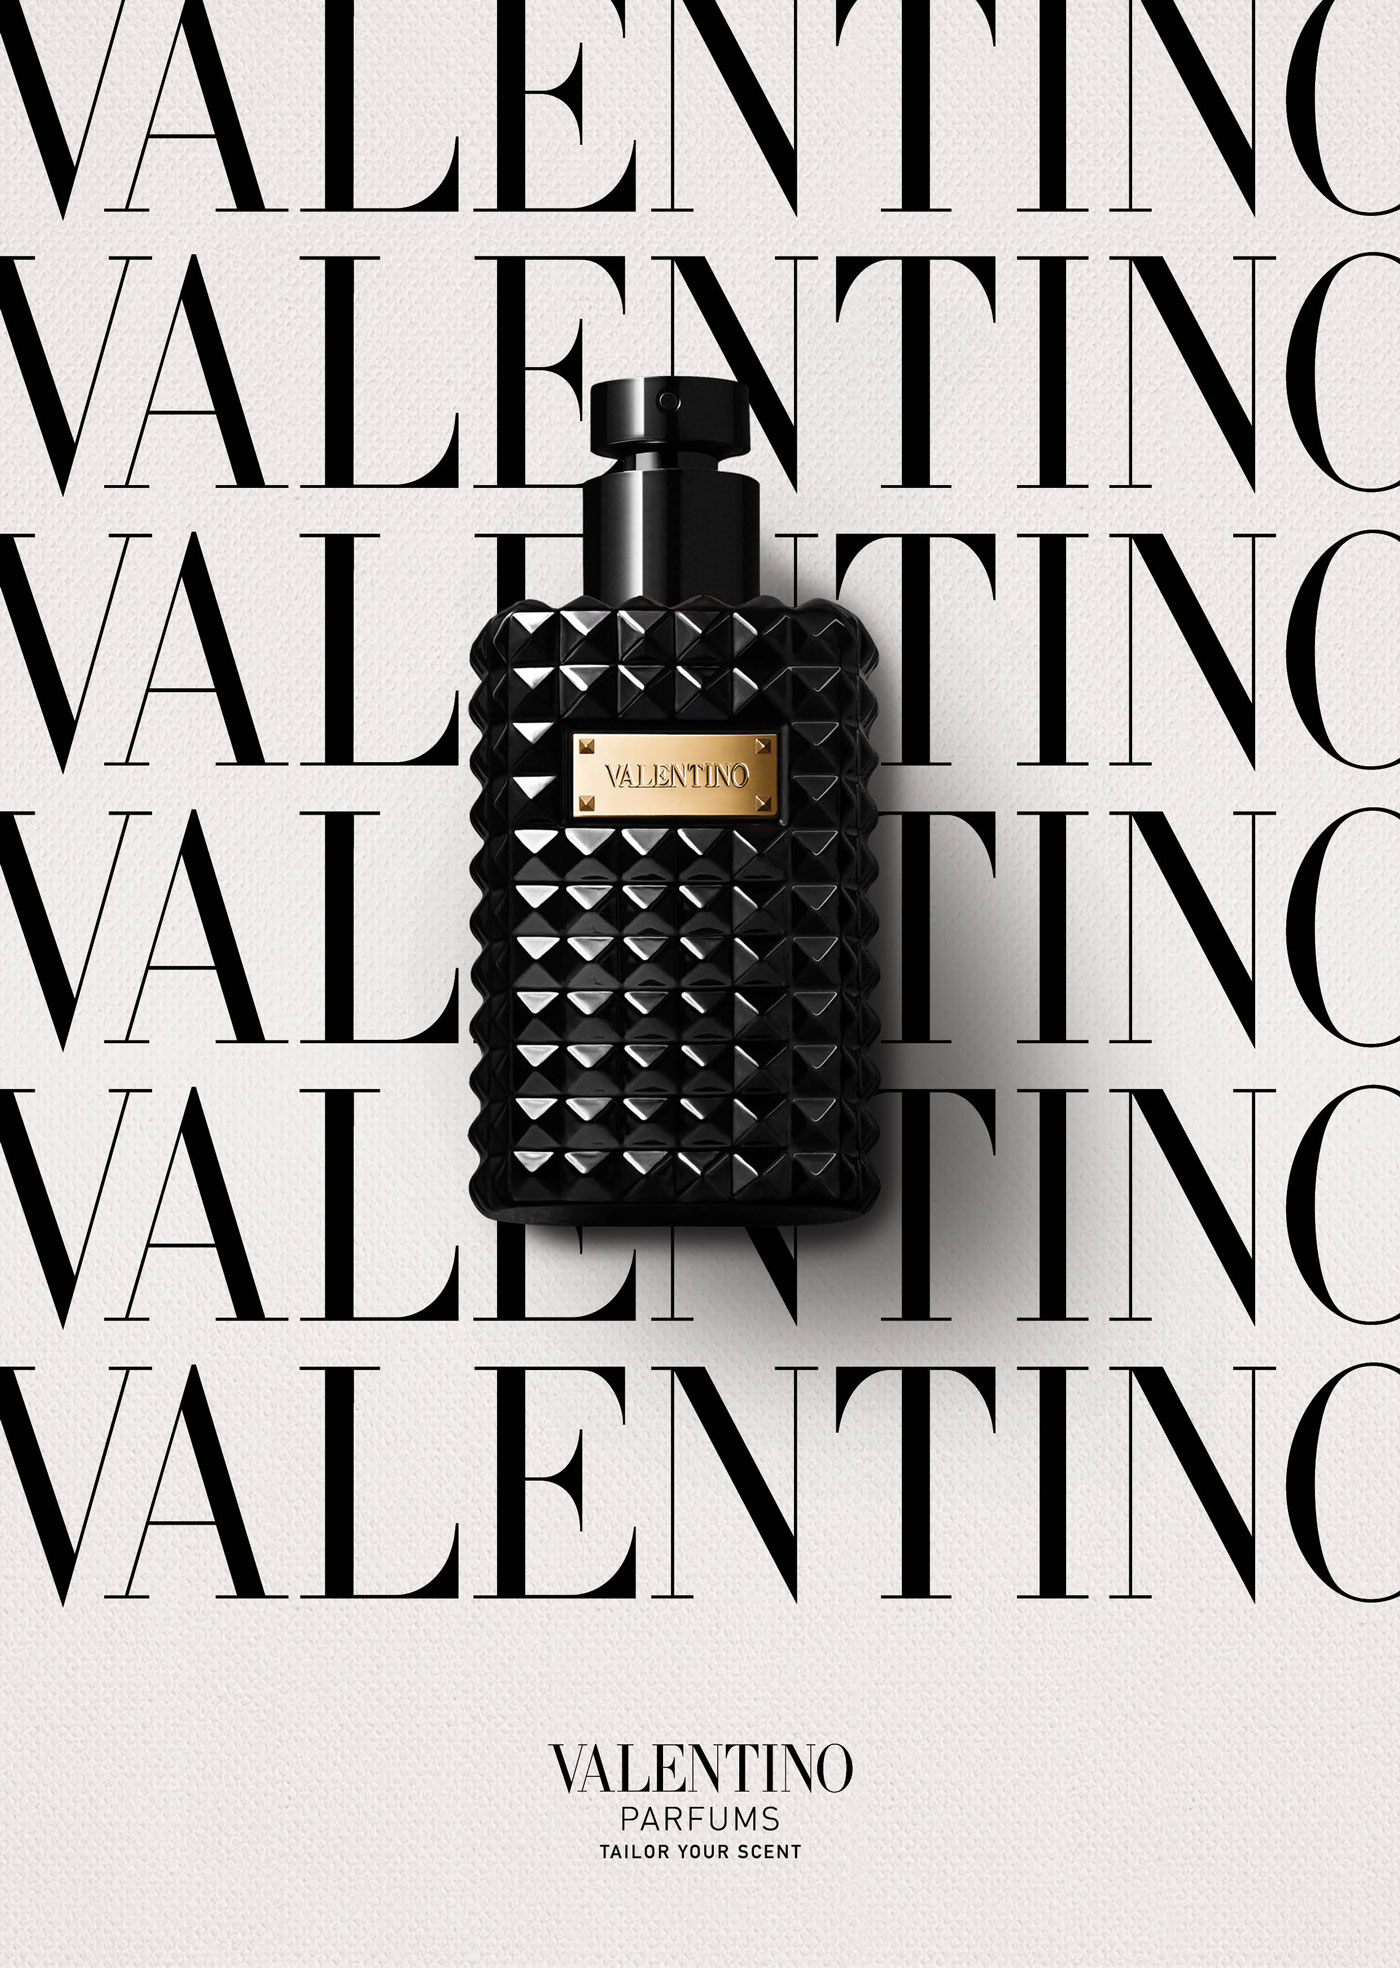 Valentino Parfums – Tailor Your Scent 2017 Campaign (prototype)